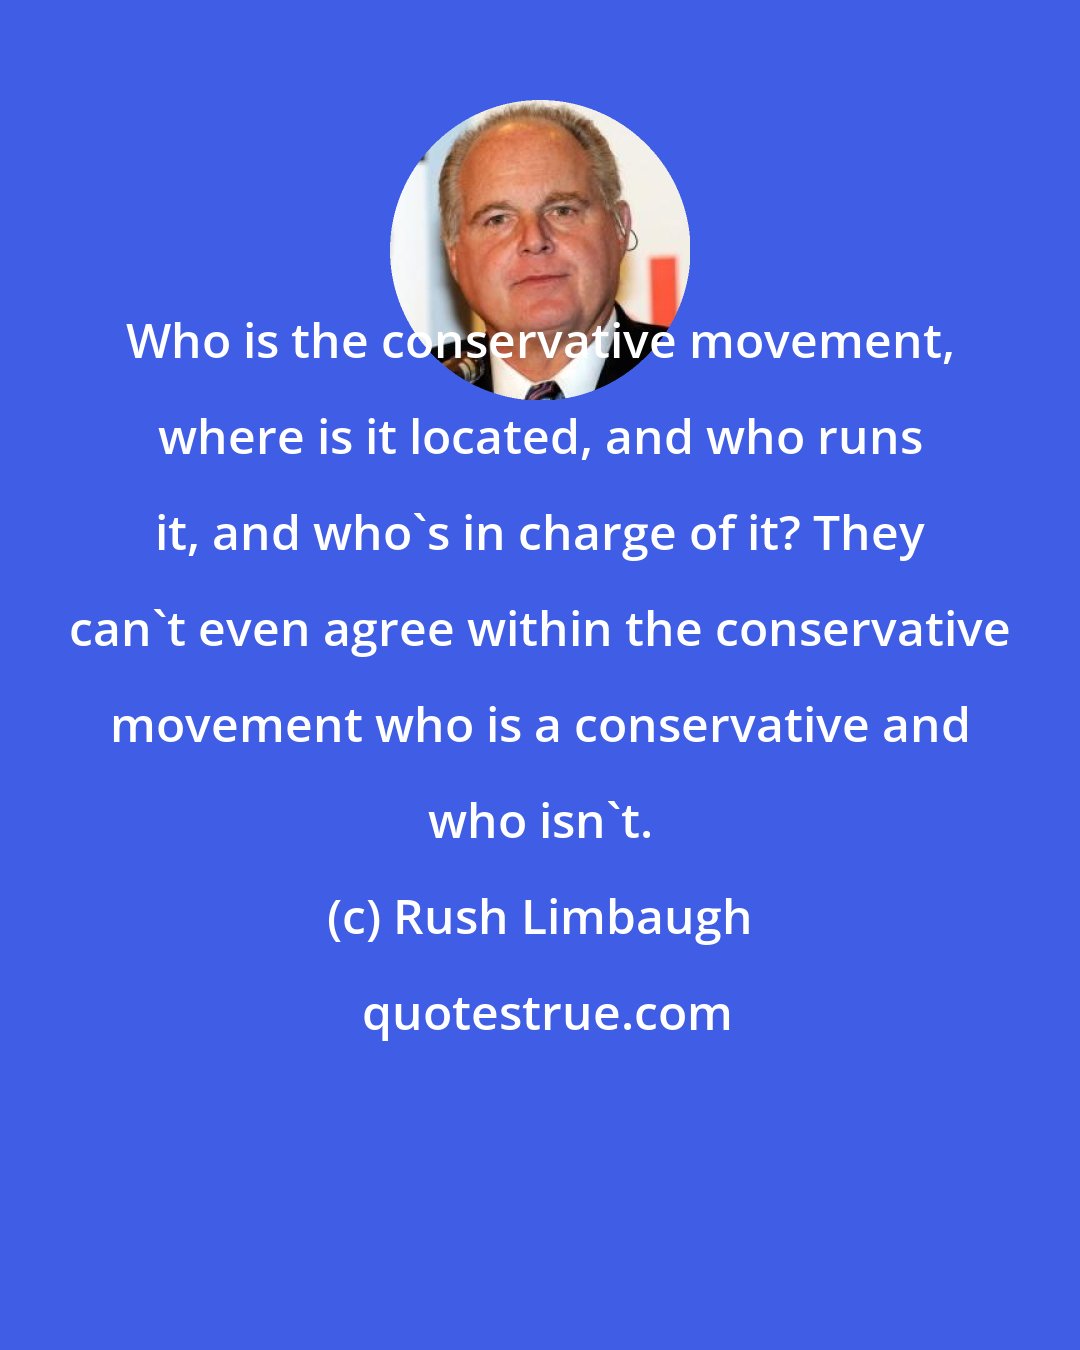 Rush Limbaugh: Who is the conservative movement, where is it located, and who runs it, and who's in charge of it? They can't even agree within the conservative movement who is a conservative and who isn't.